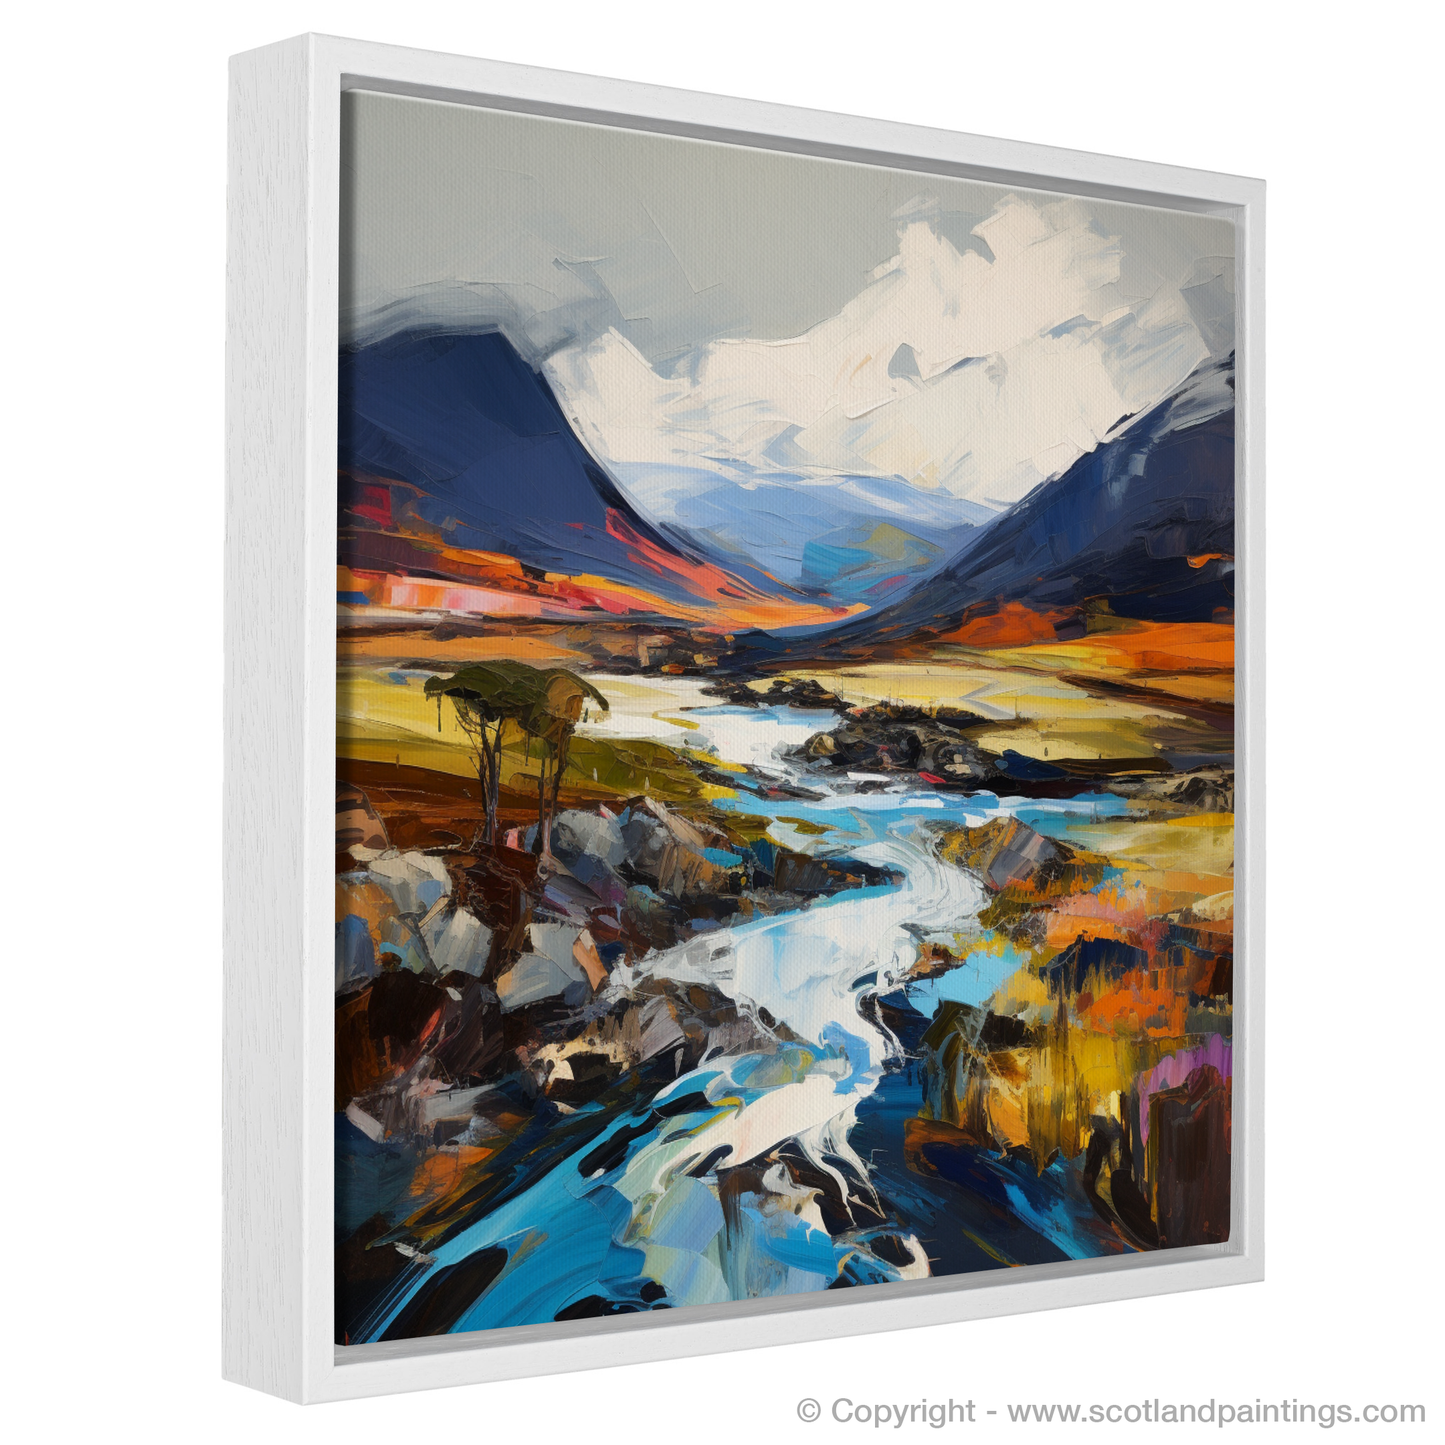 Painting and Art Print of Geal-chàrn (Drumochter) entitled "Expressionist Essence of Geal-chàrn".